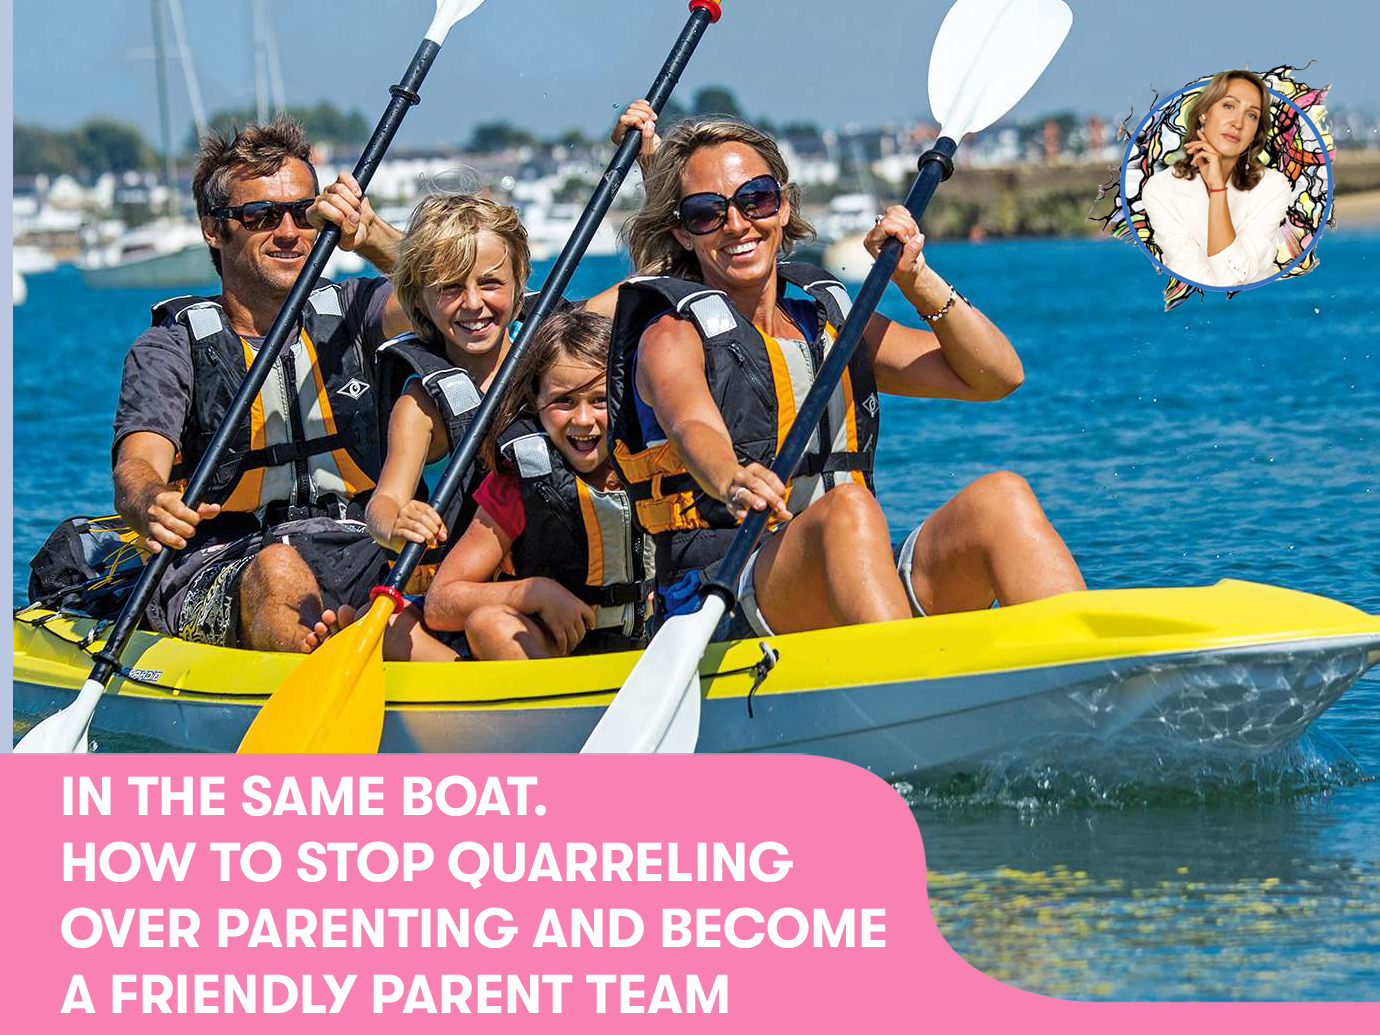 “In the same boat. How to stop quarreling over parenting and become a friendly parent team“